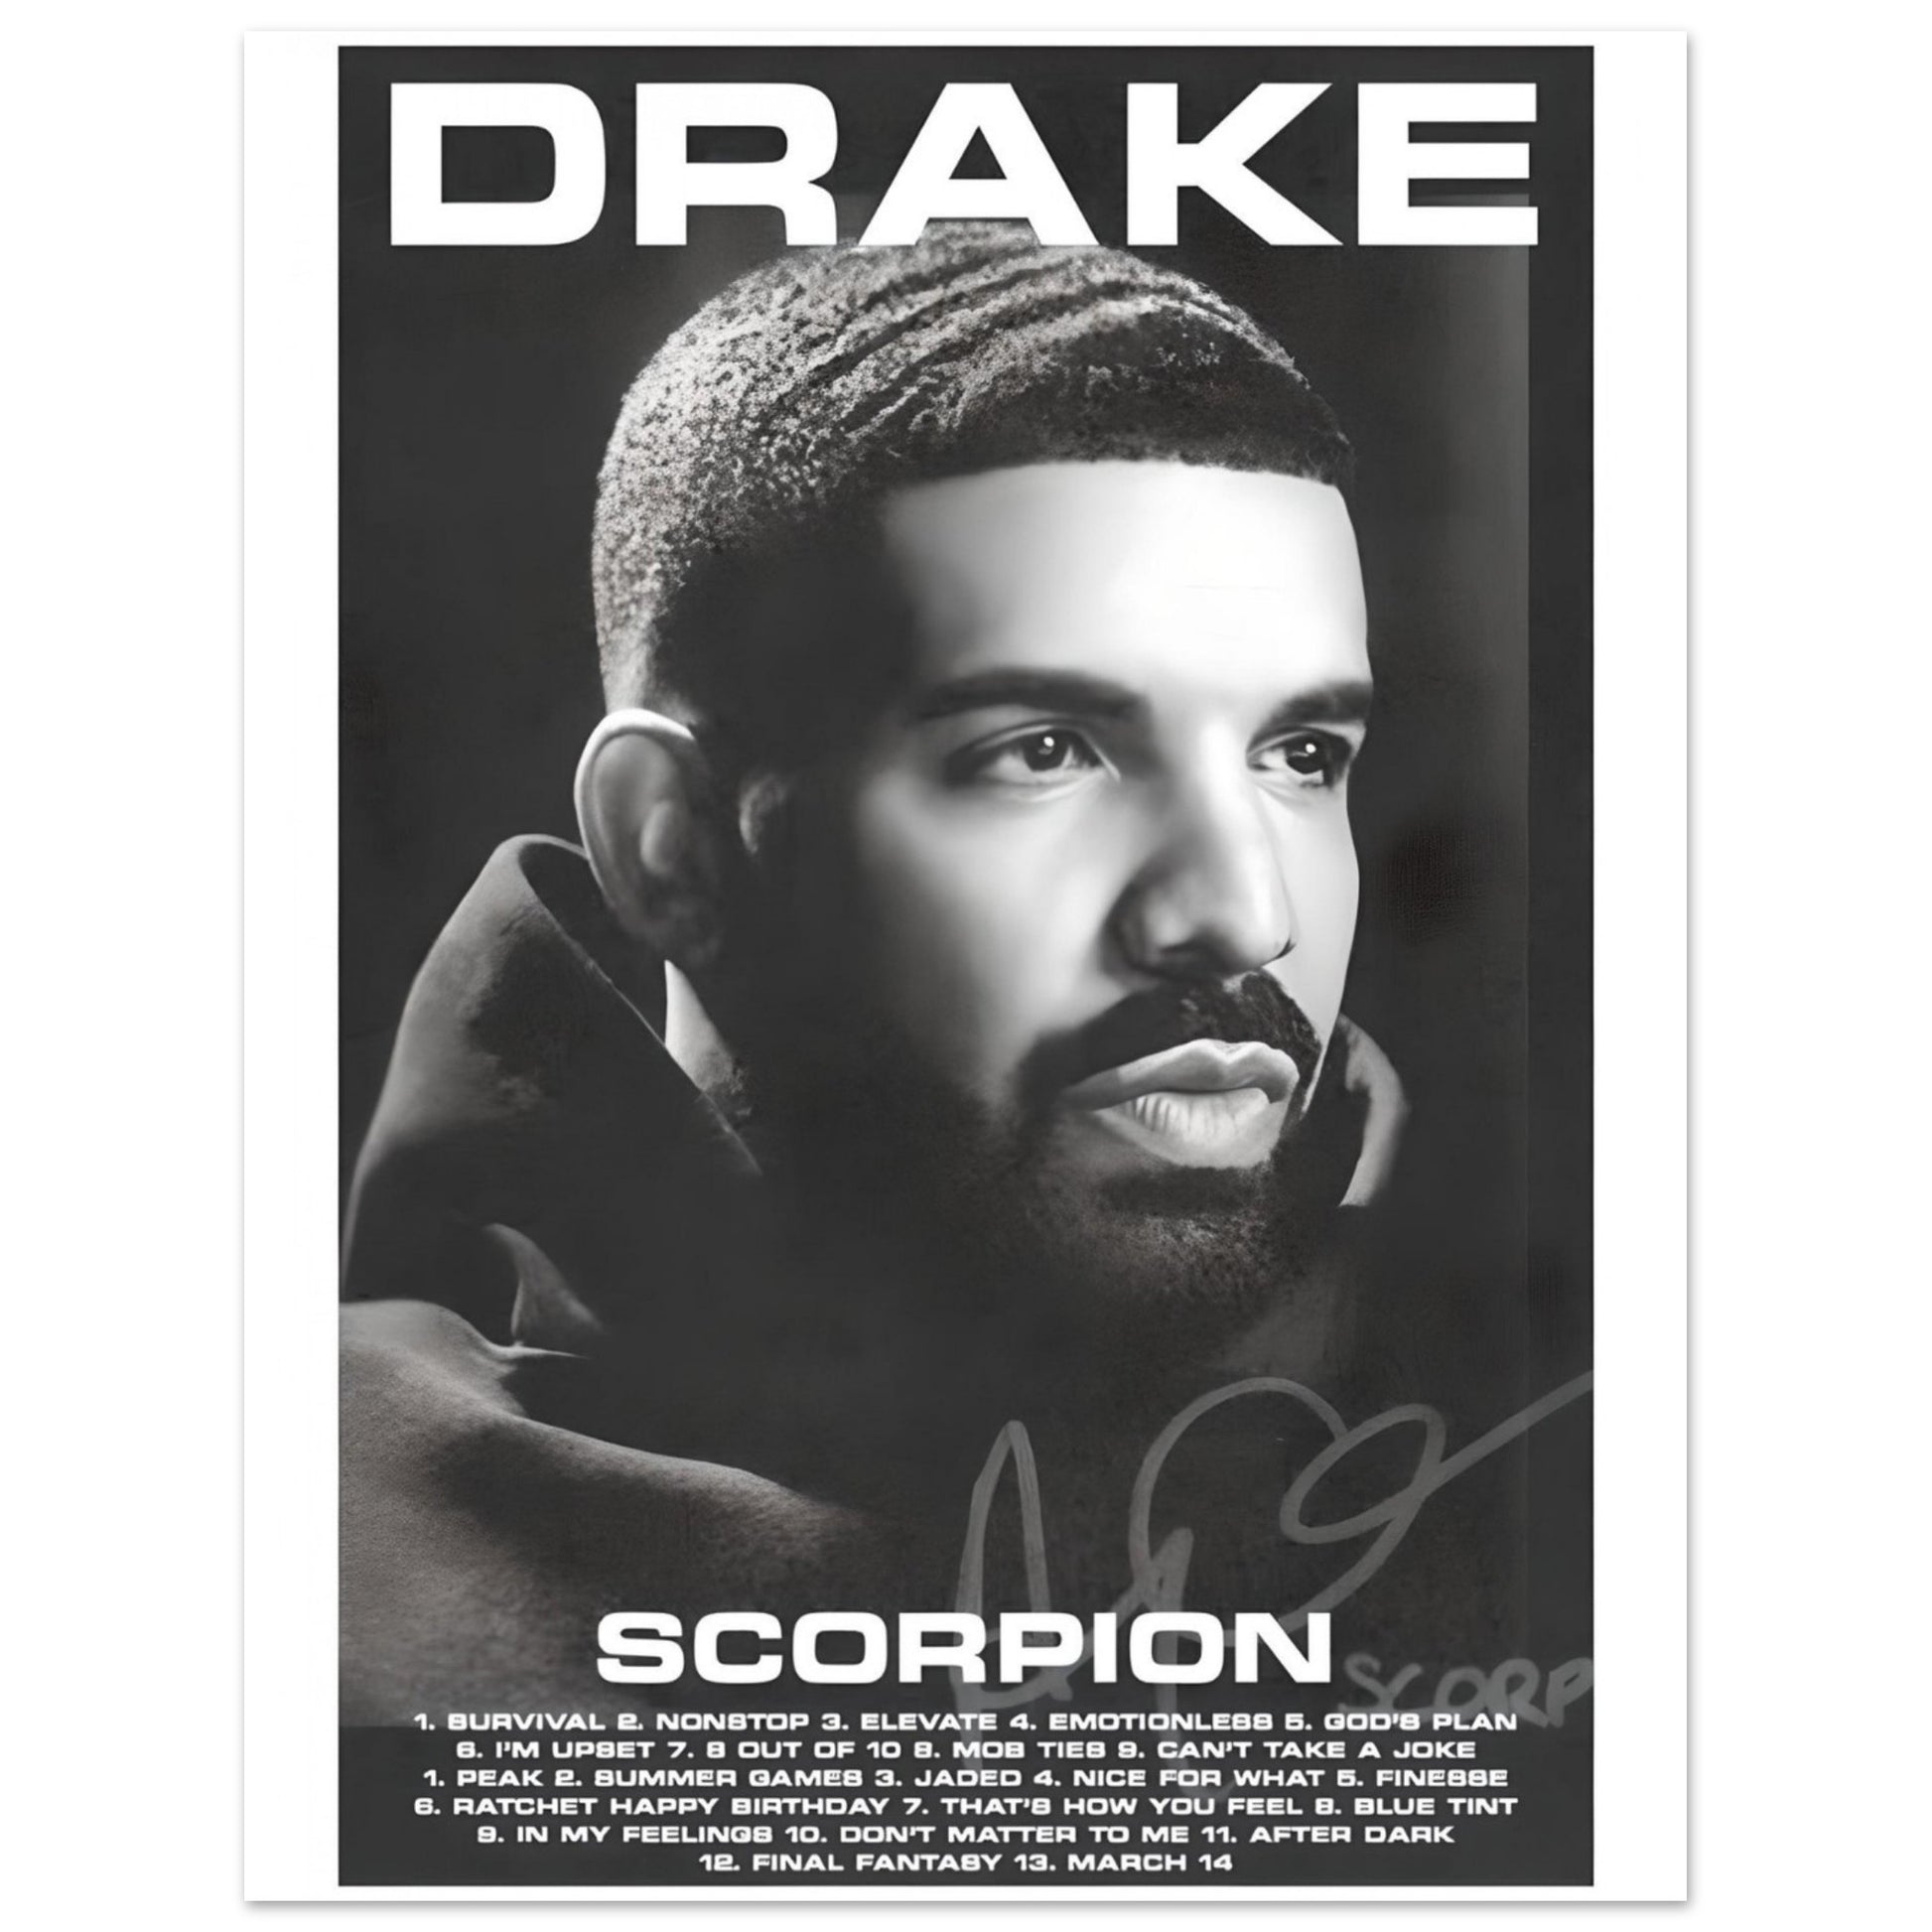  Drake Poster Set of 14 Album Cover Posters 8 x 12